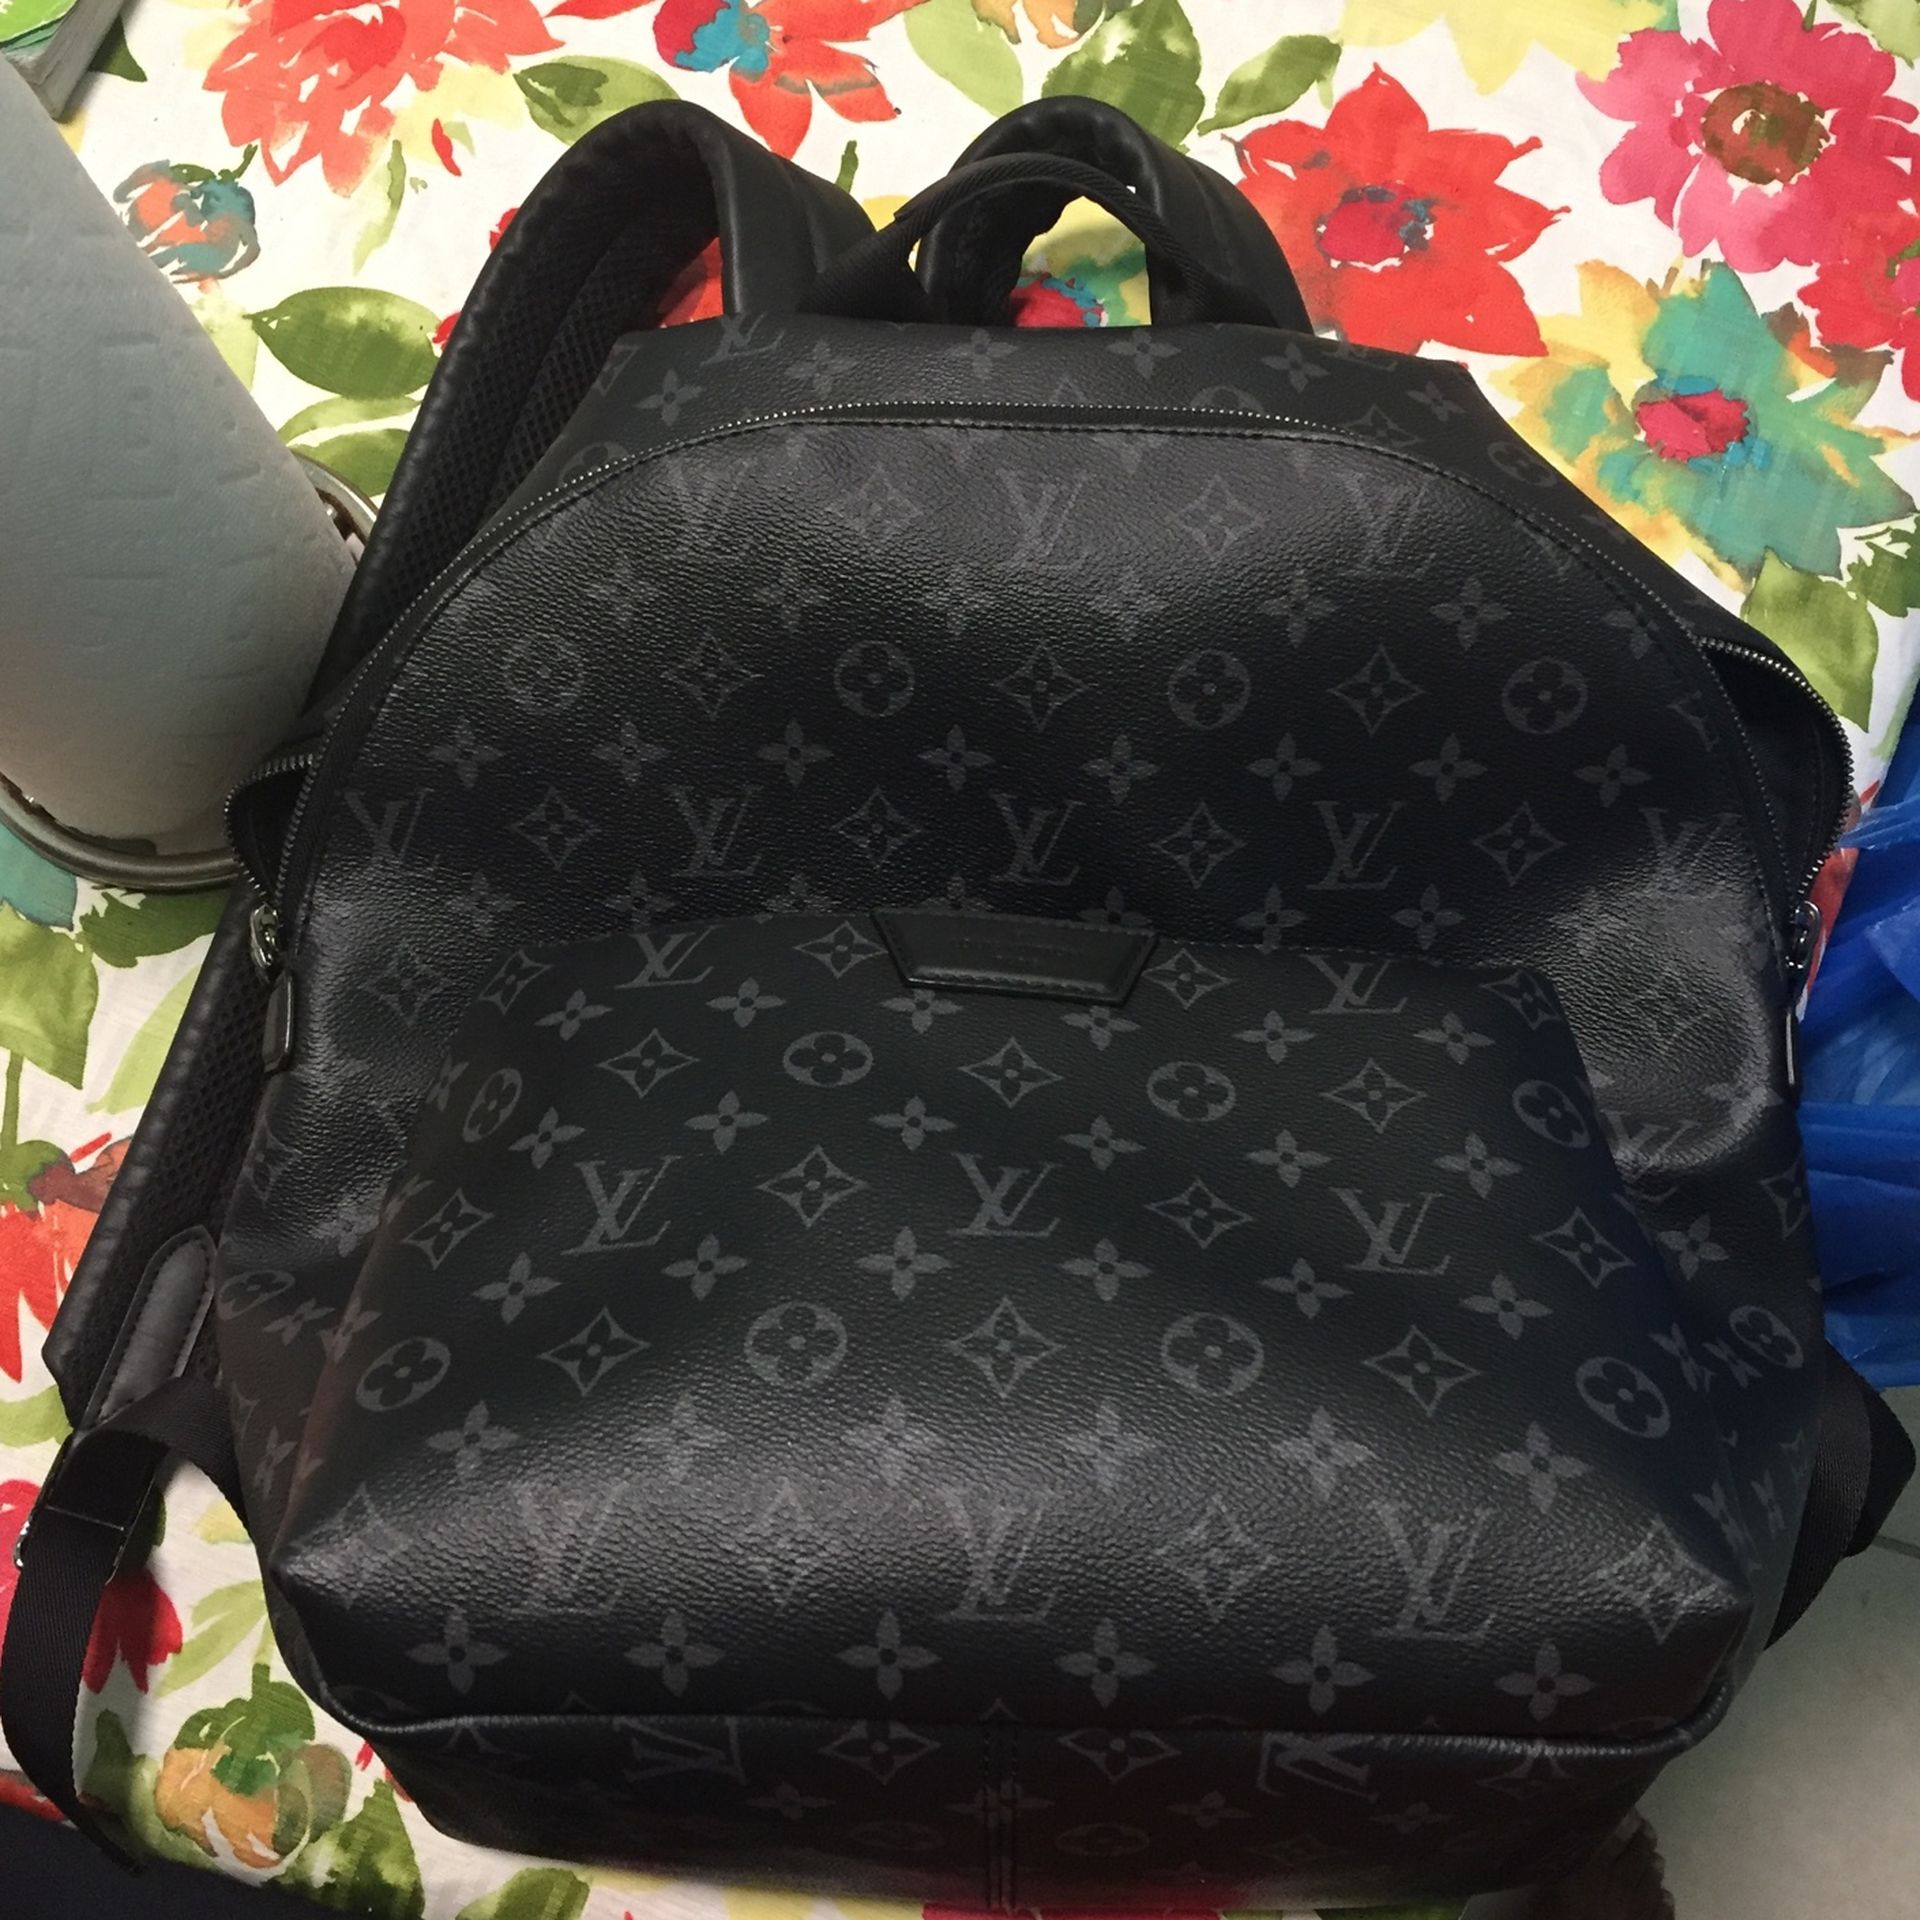 Louis Vuitton Authenticated Brooklyn Bag